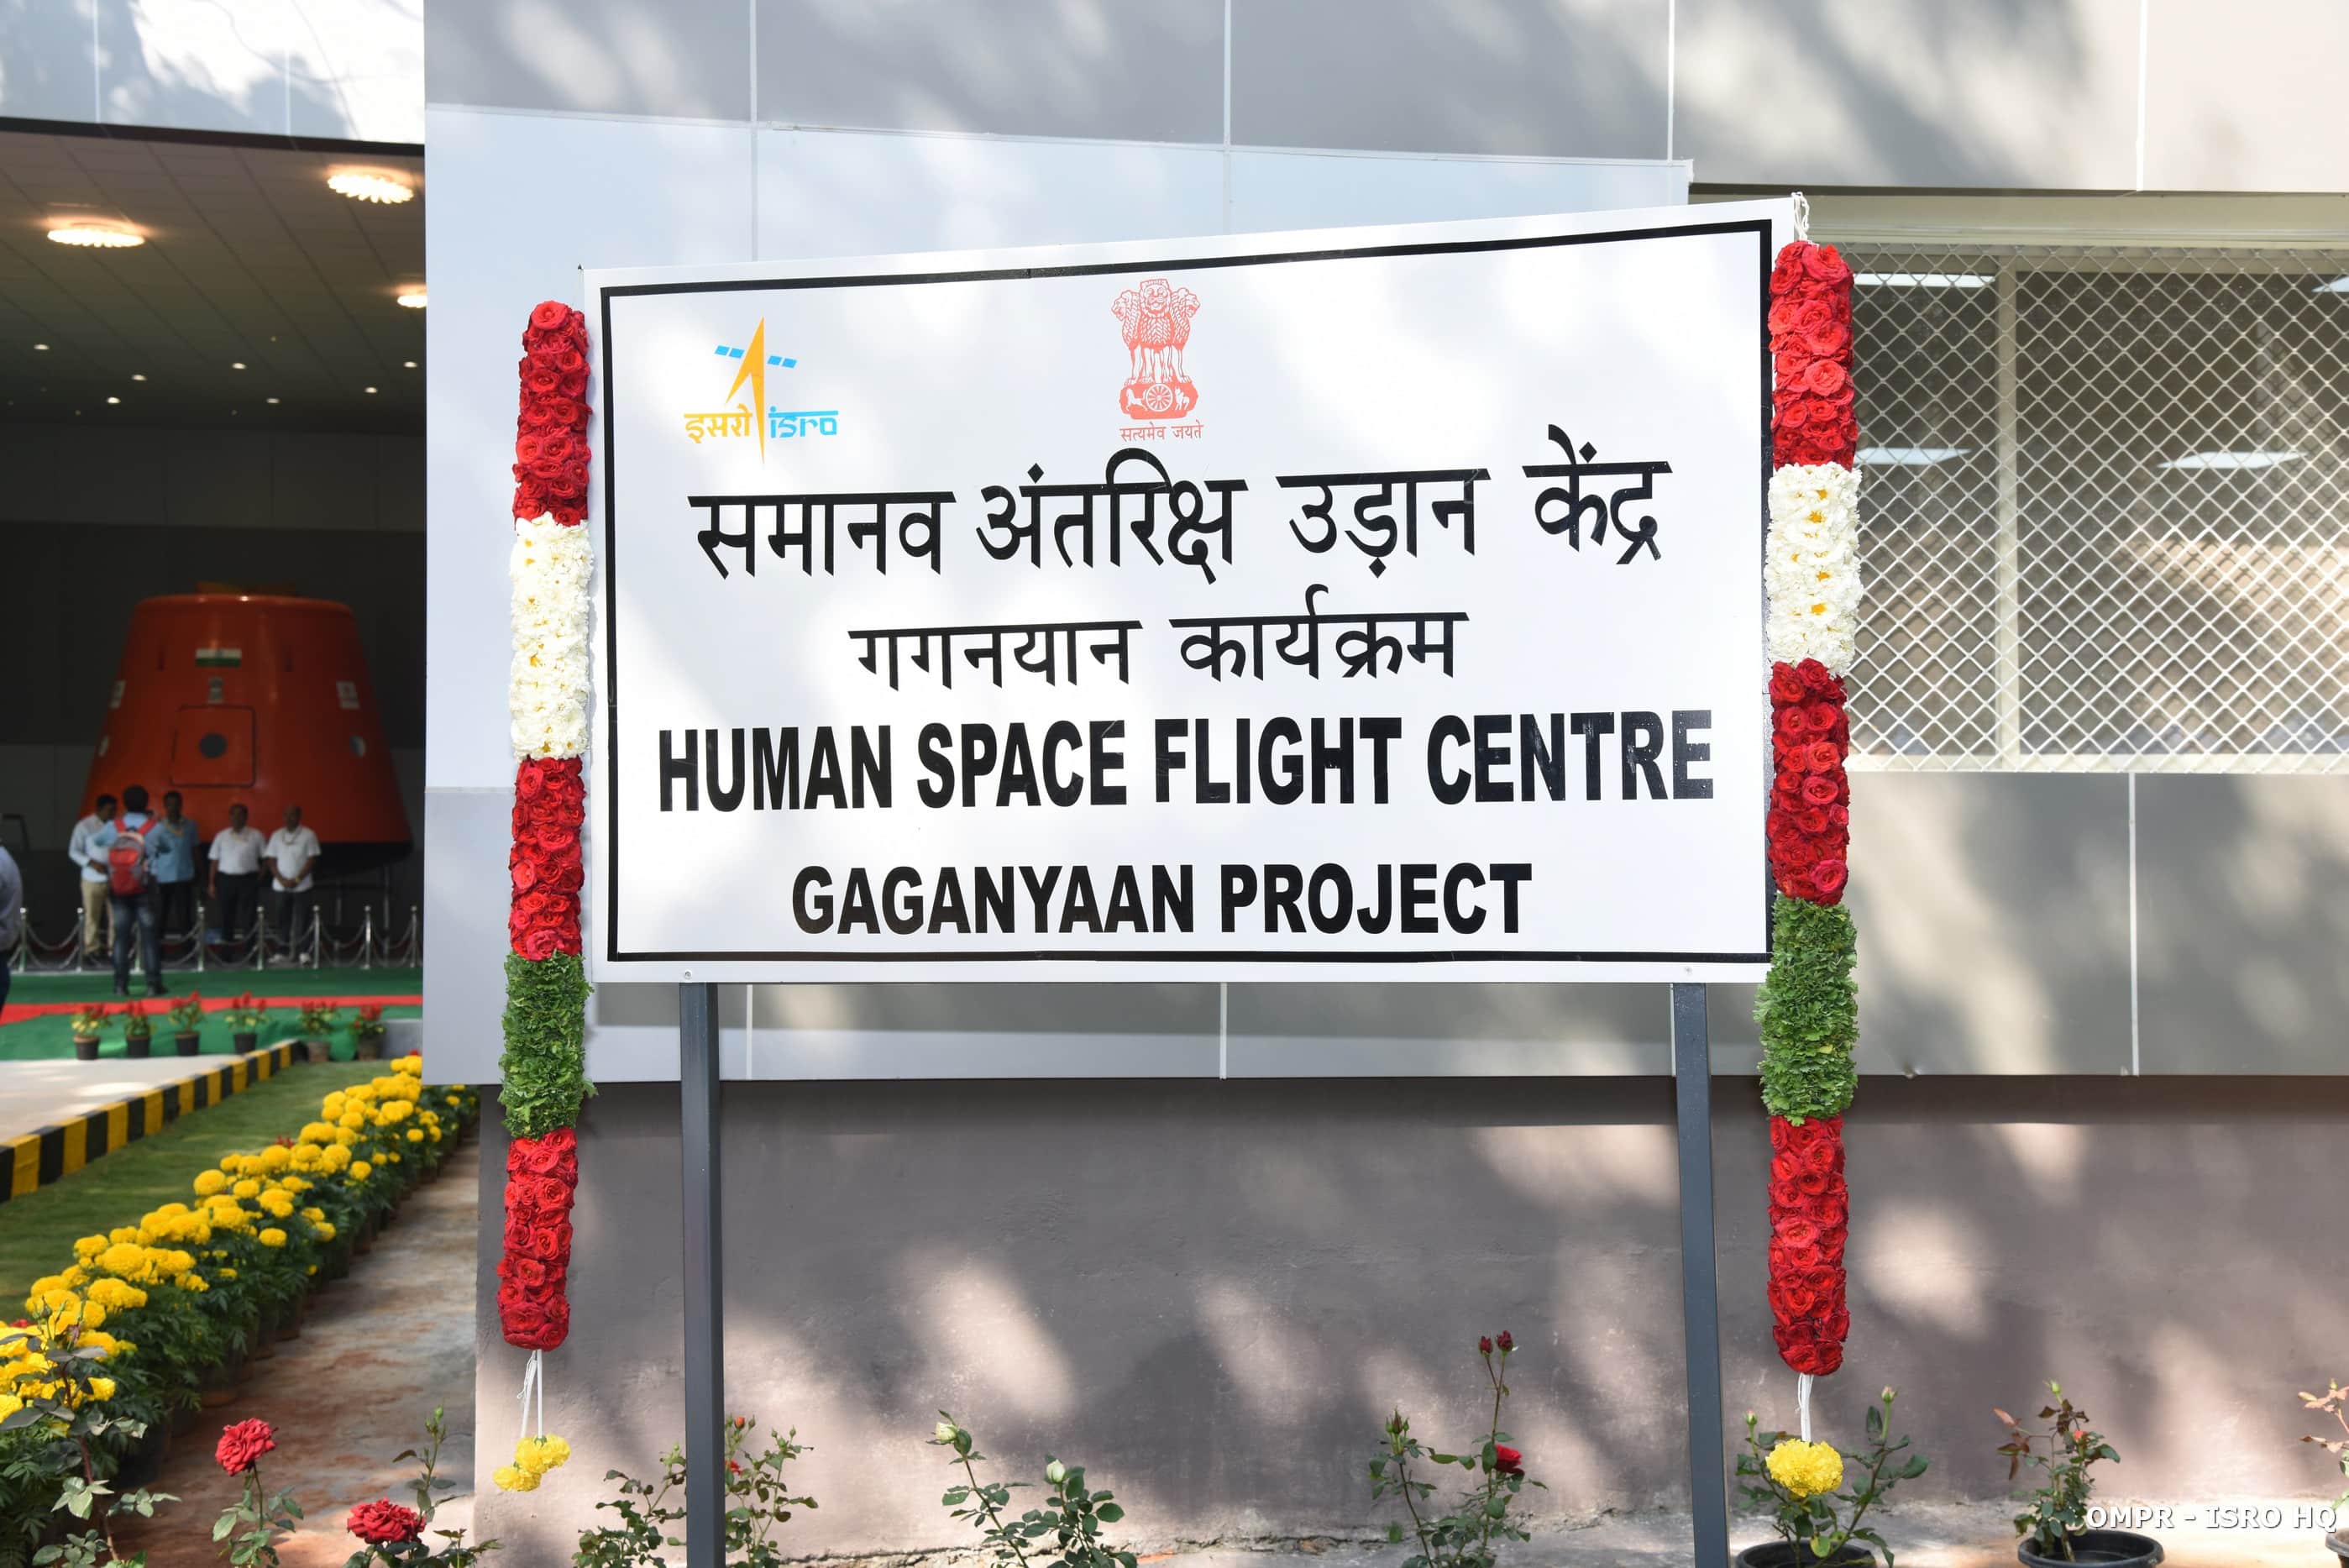 Gaganyaan, India’s first manned space flight mission, will be delayed because of COVID-19